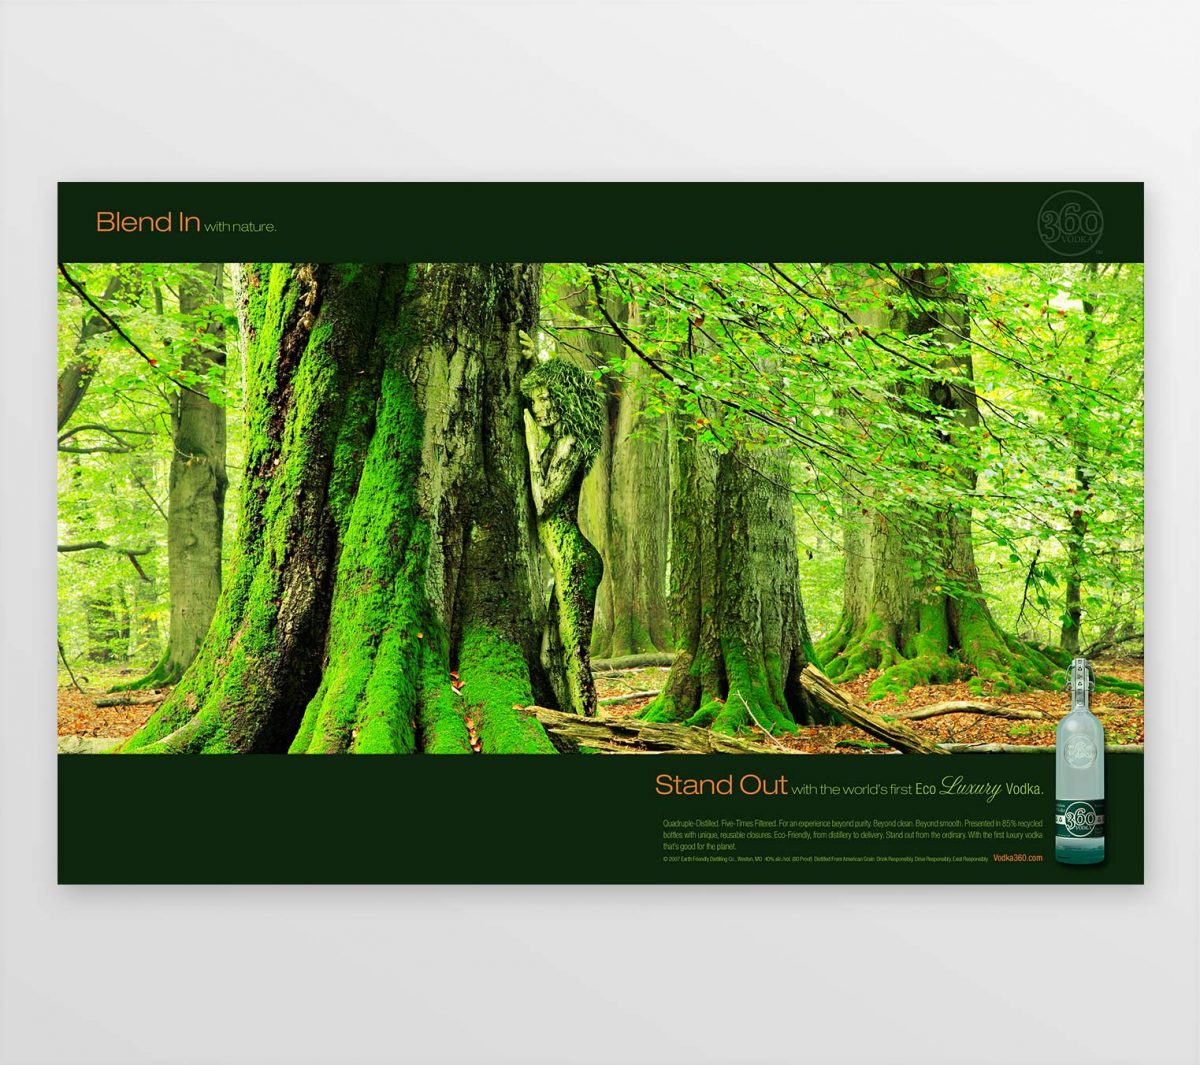 360 Vodka Blend In/Stand Out print campaign - image of moss covered woman blending in to a forest scene